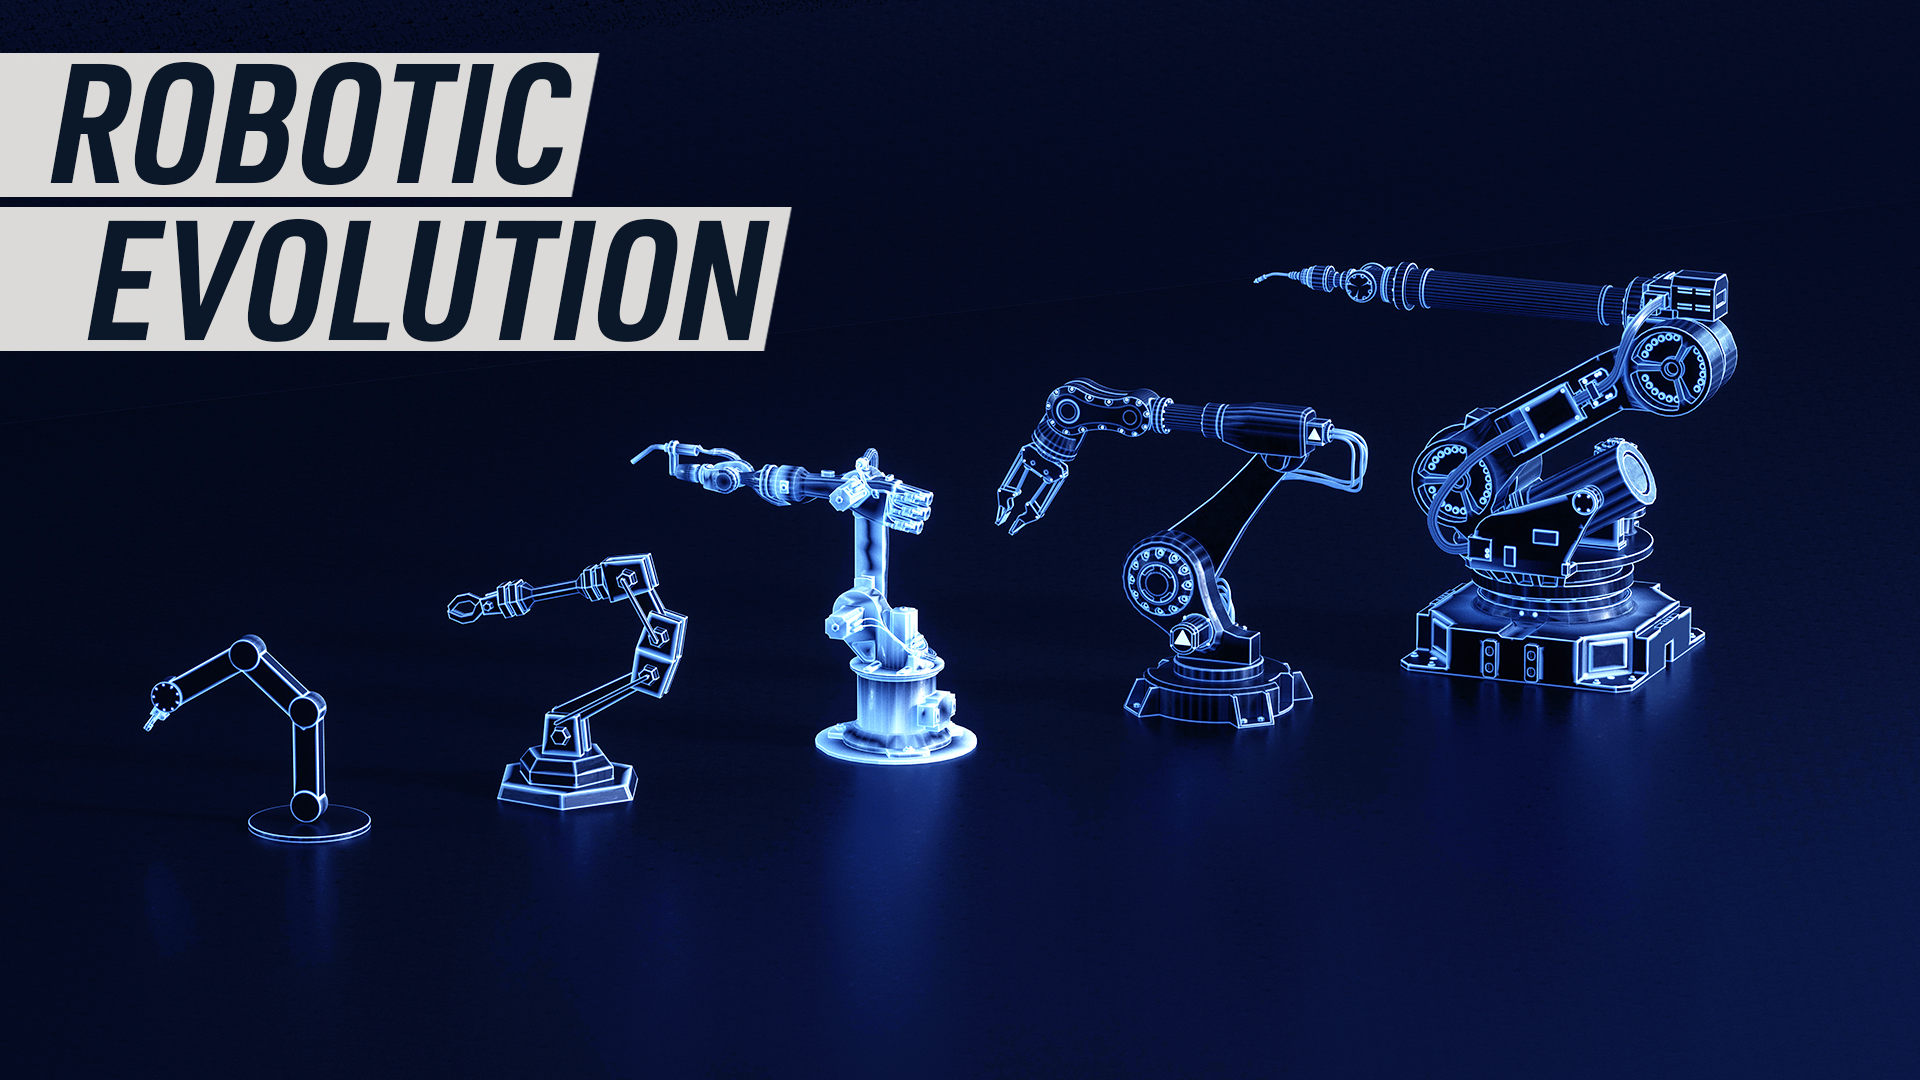 An illustration mimicking The March of Progress shows the evolution of a robotic arm.